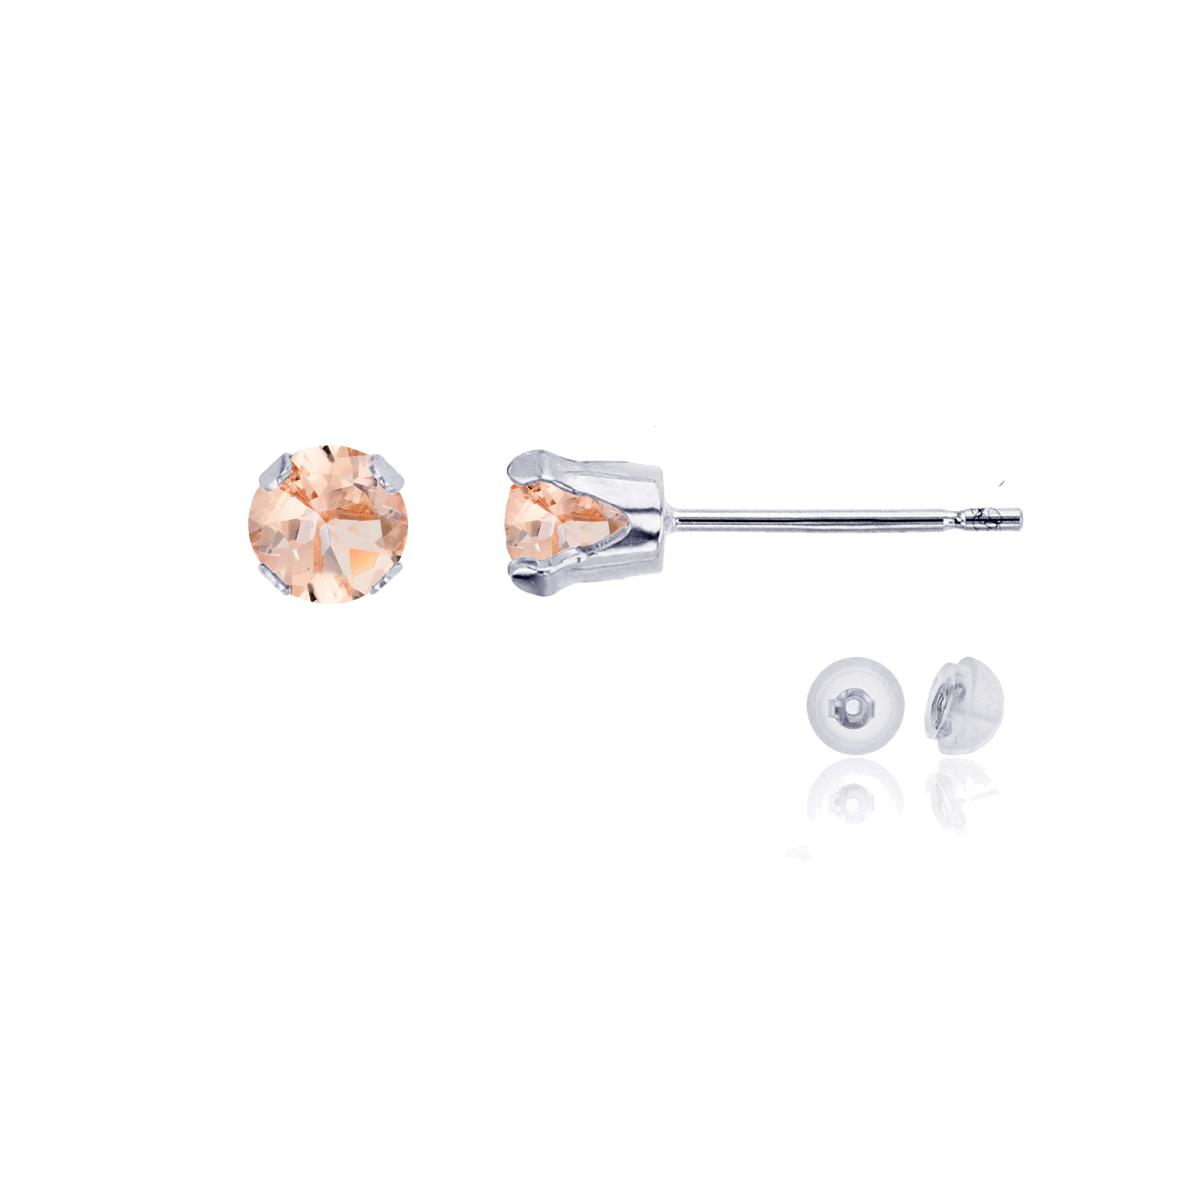 10K White Gold 4mm Round Morganite Stud Earring with Silicone Back